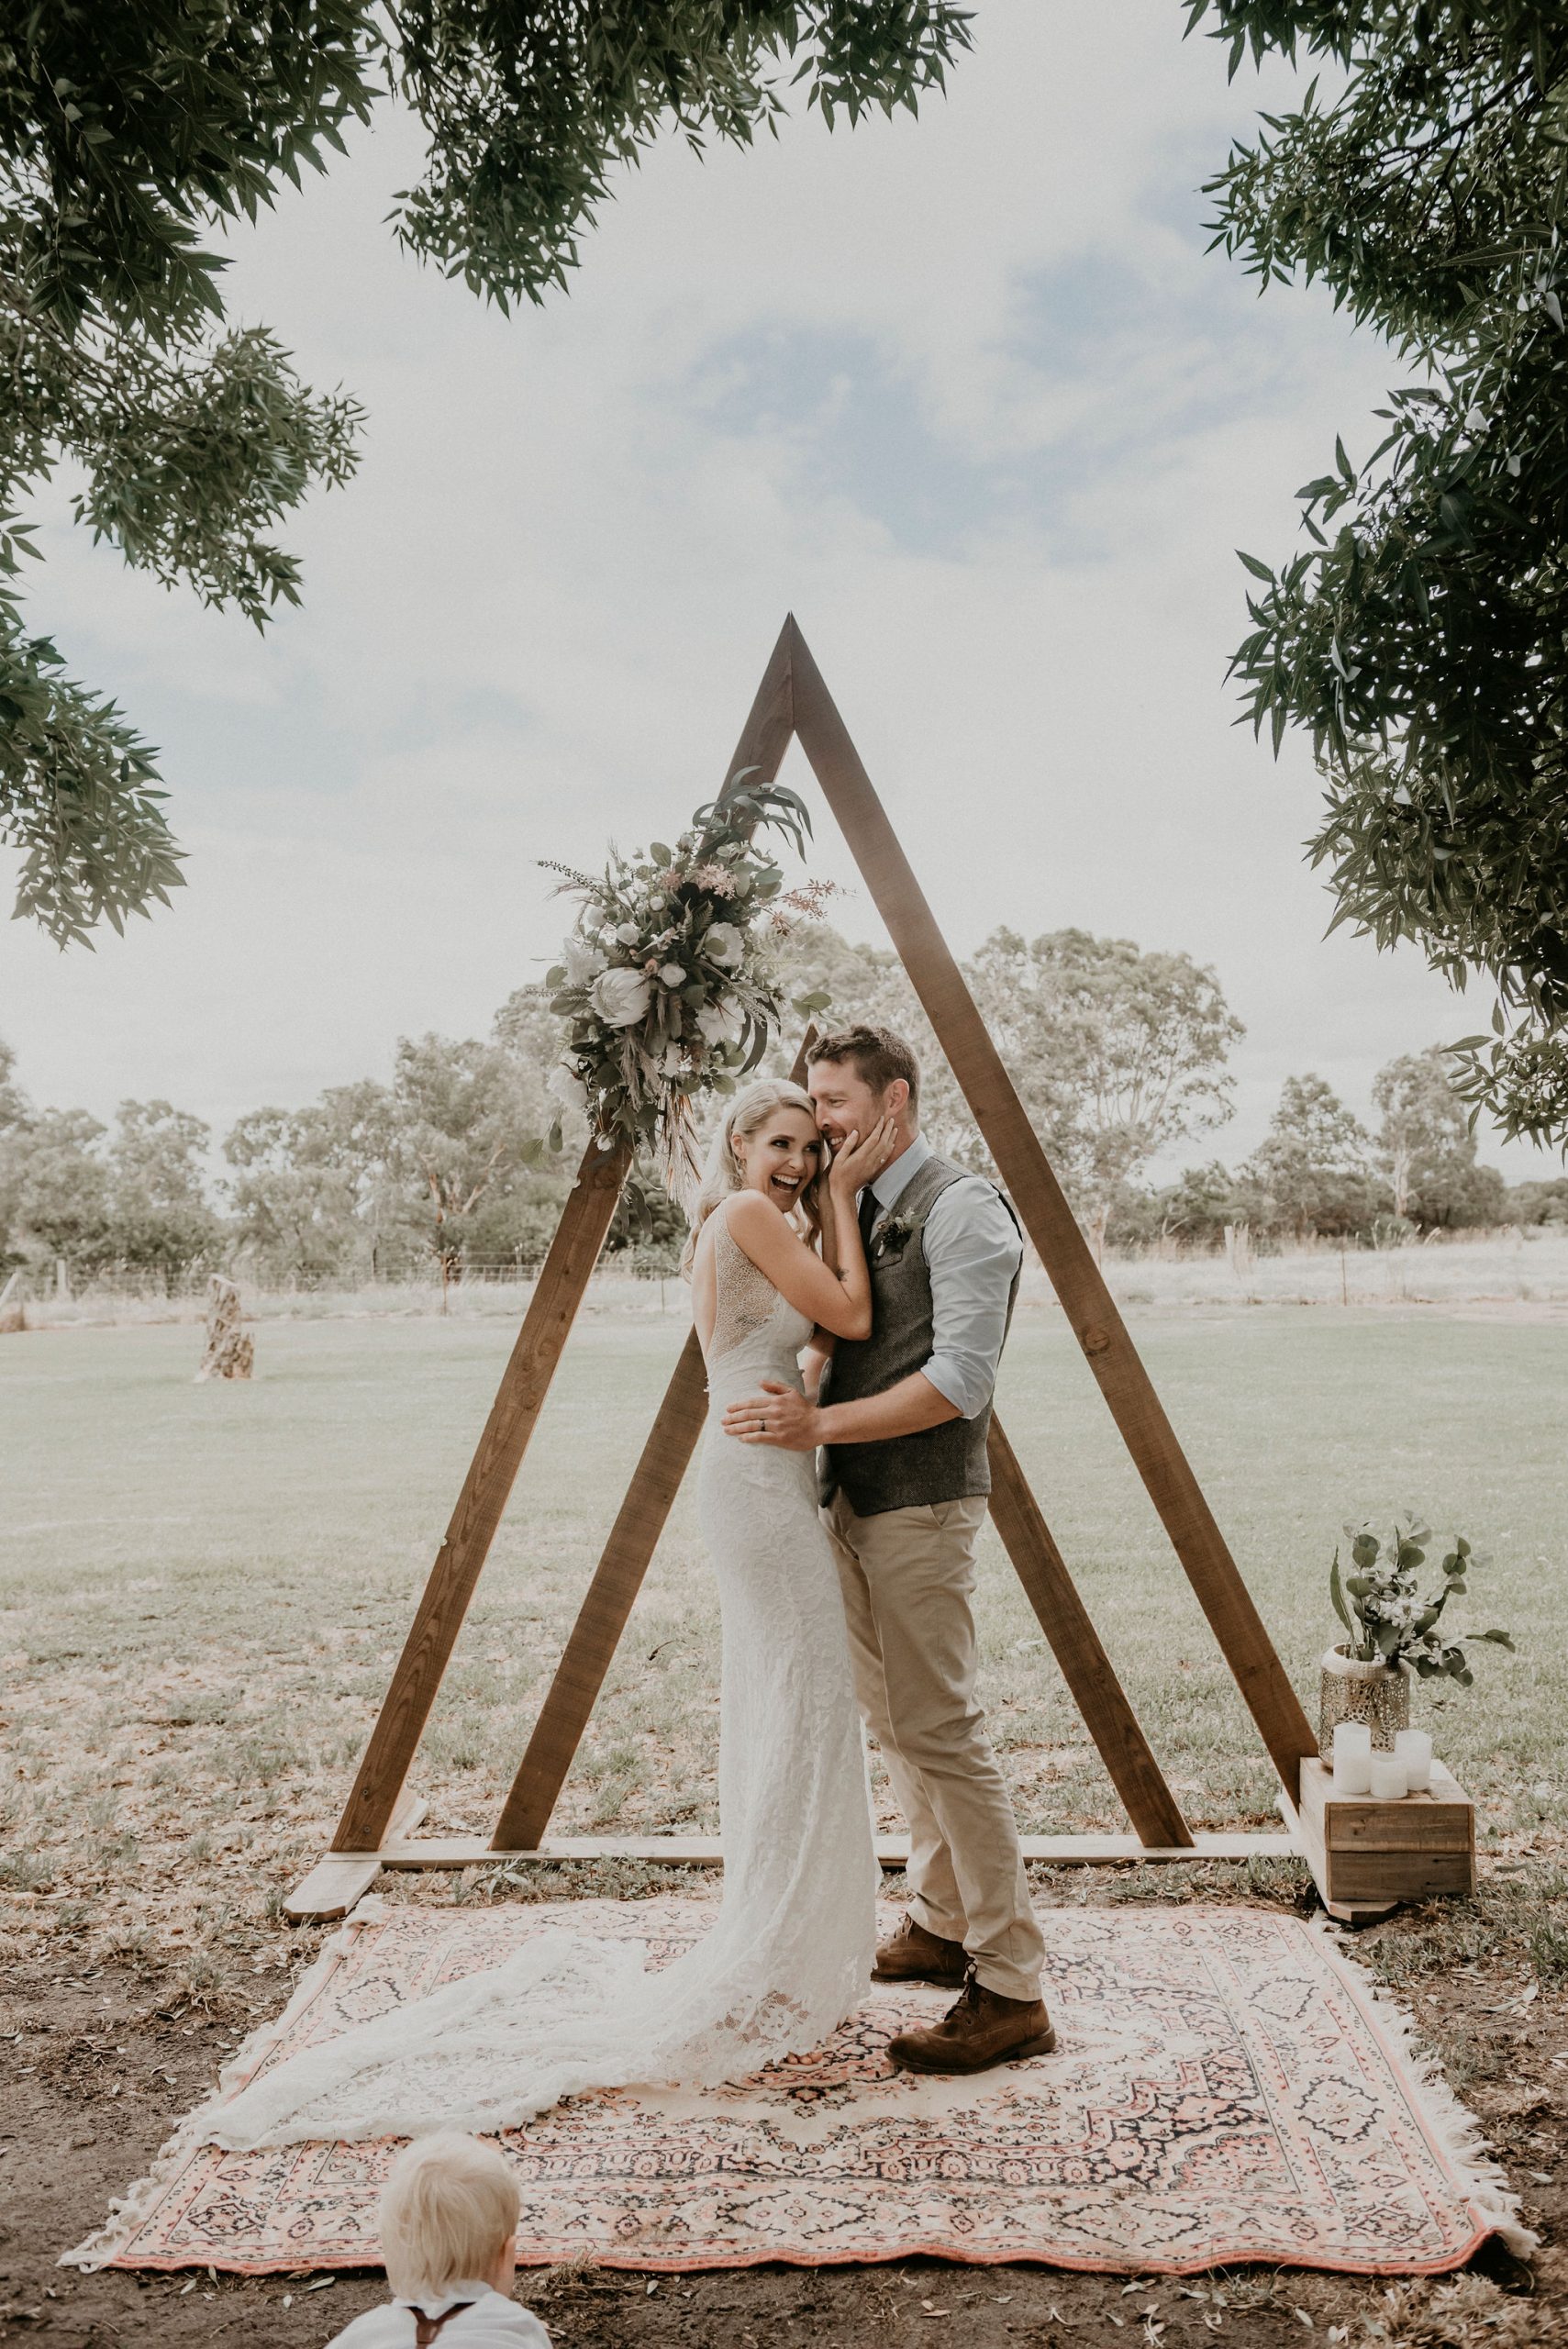 Lets-Elope-Melbourne-Celebrant-Photographer-Elopement-Package-Victoria-Sarah-Matler-Photography-Elop-at-Home-Farm-weddings-intimate-4